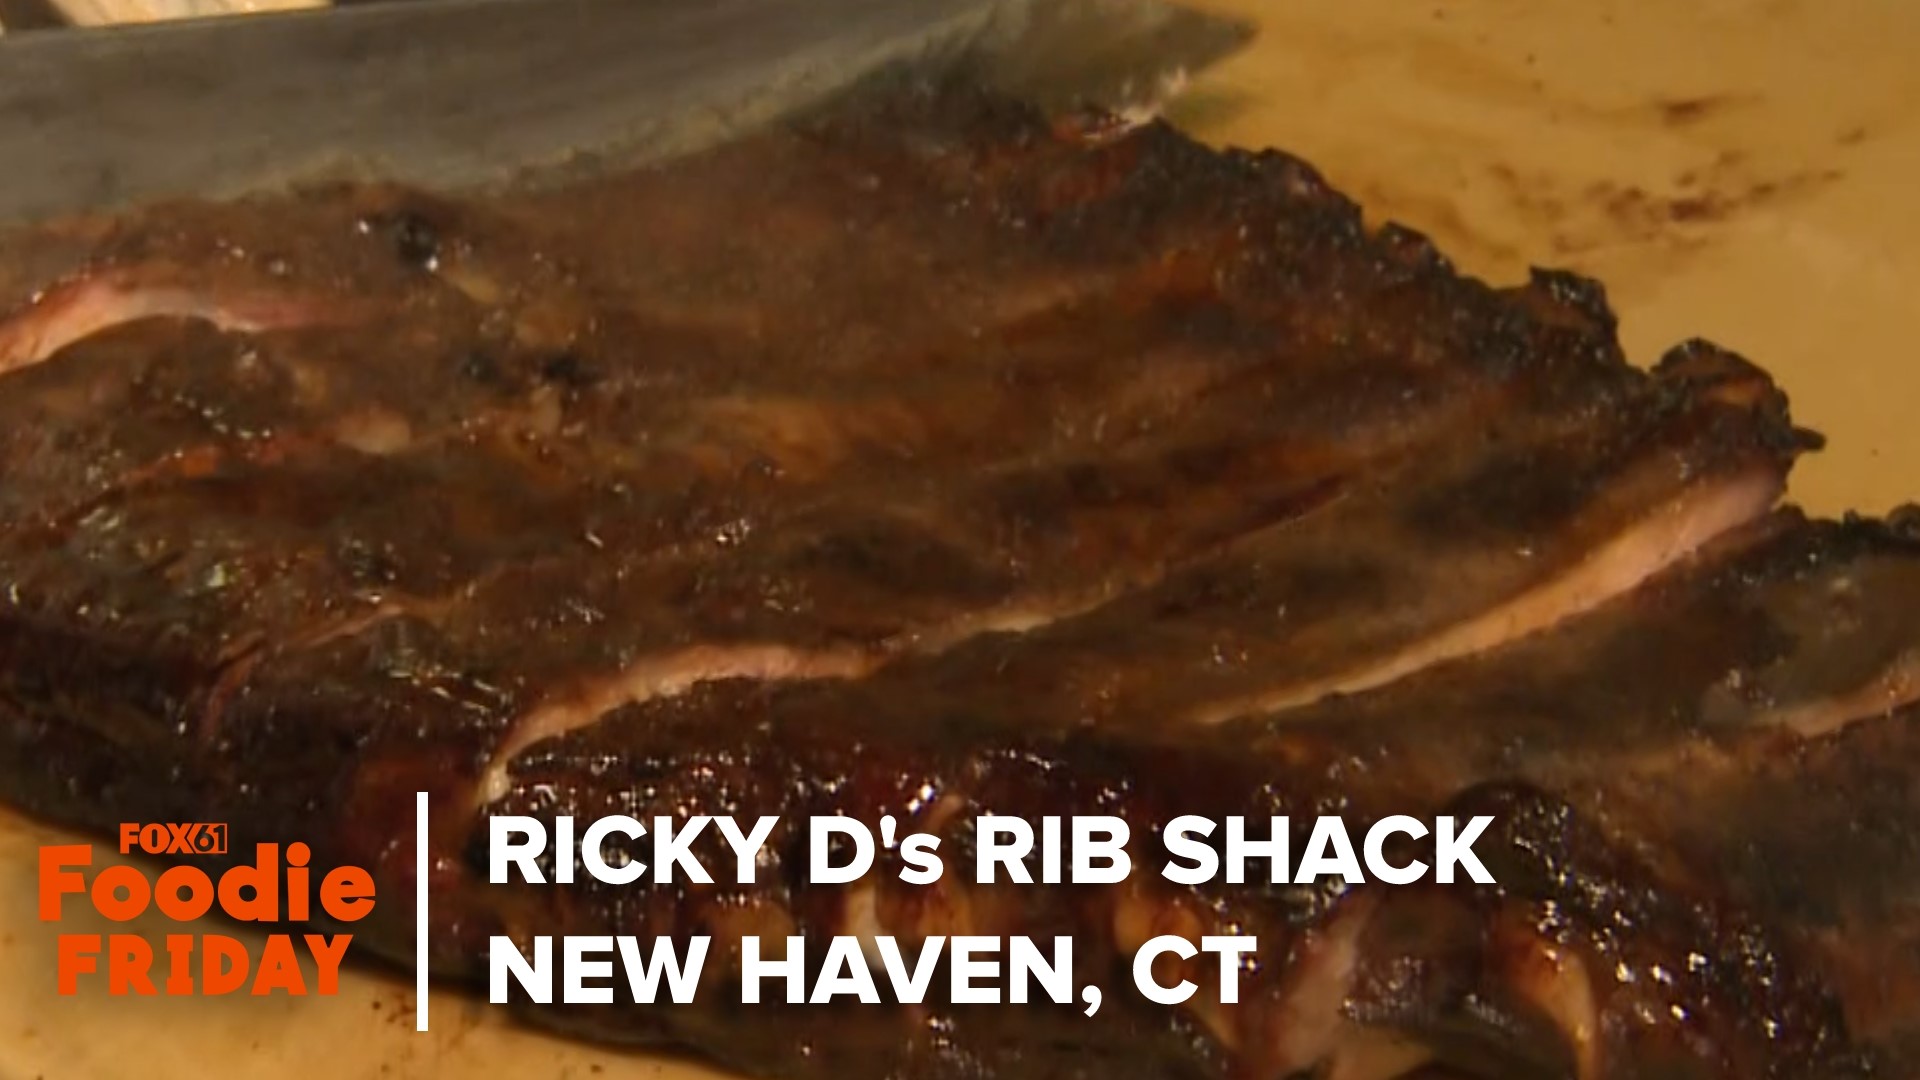 Rachel Piscitelli visited Ricky D's Rib Shack in New Haven, where they tell customers "don't bite ya fingers!"